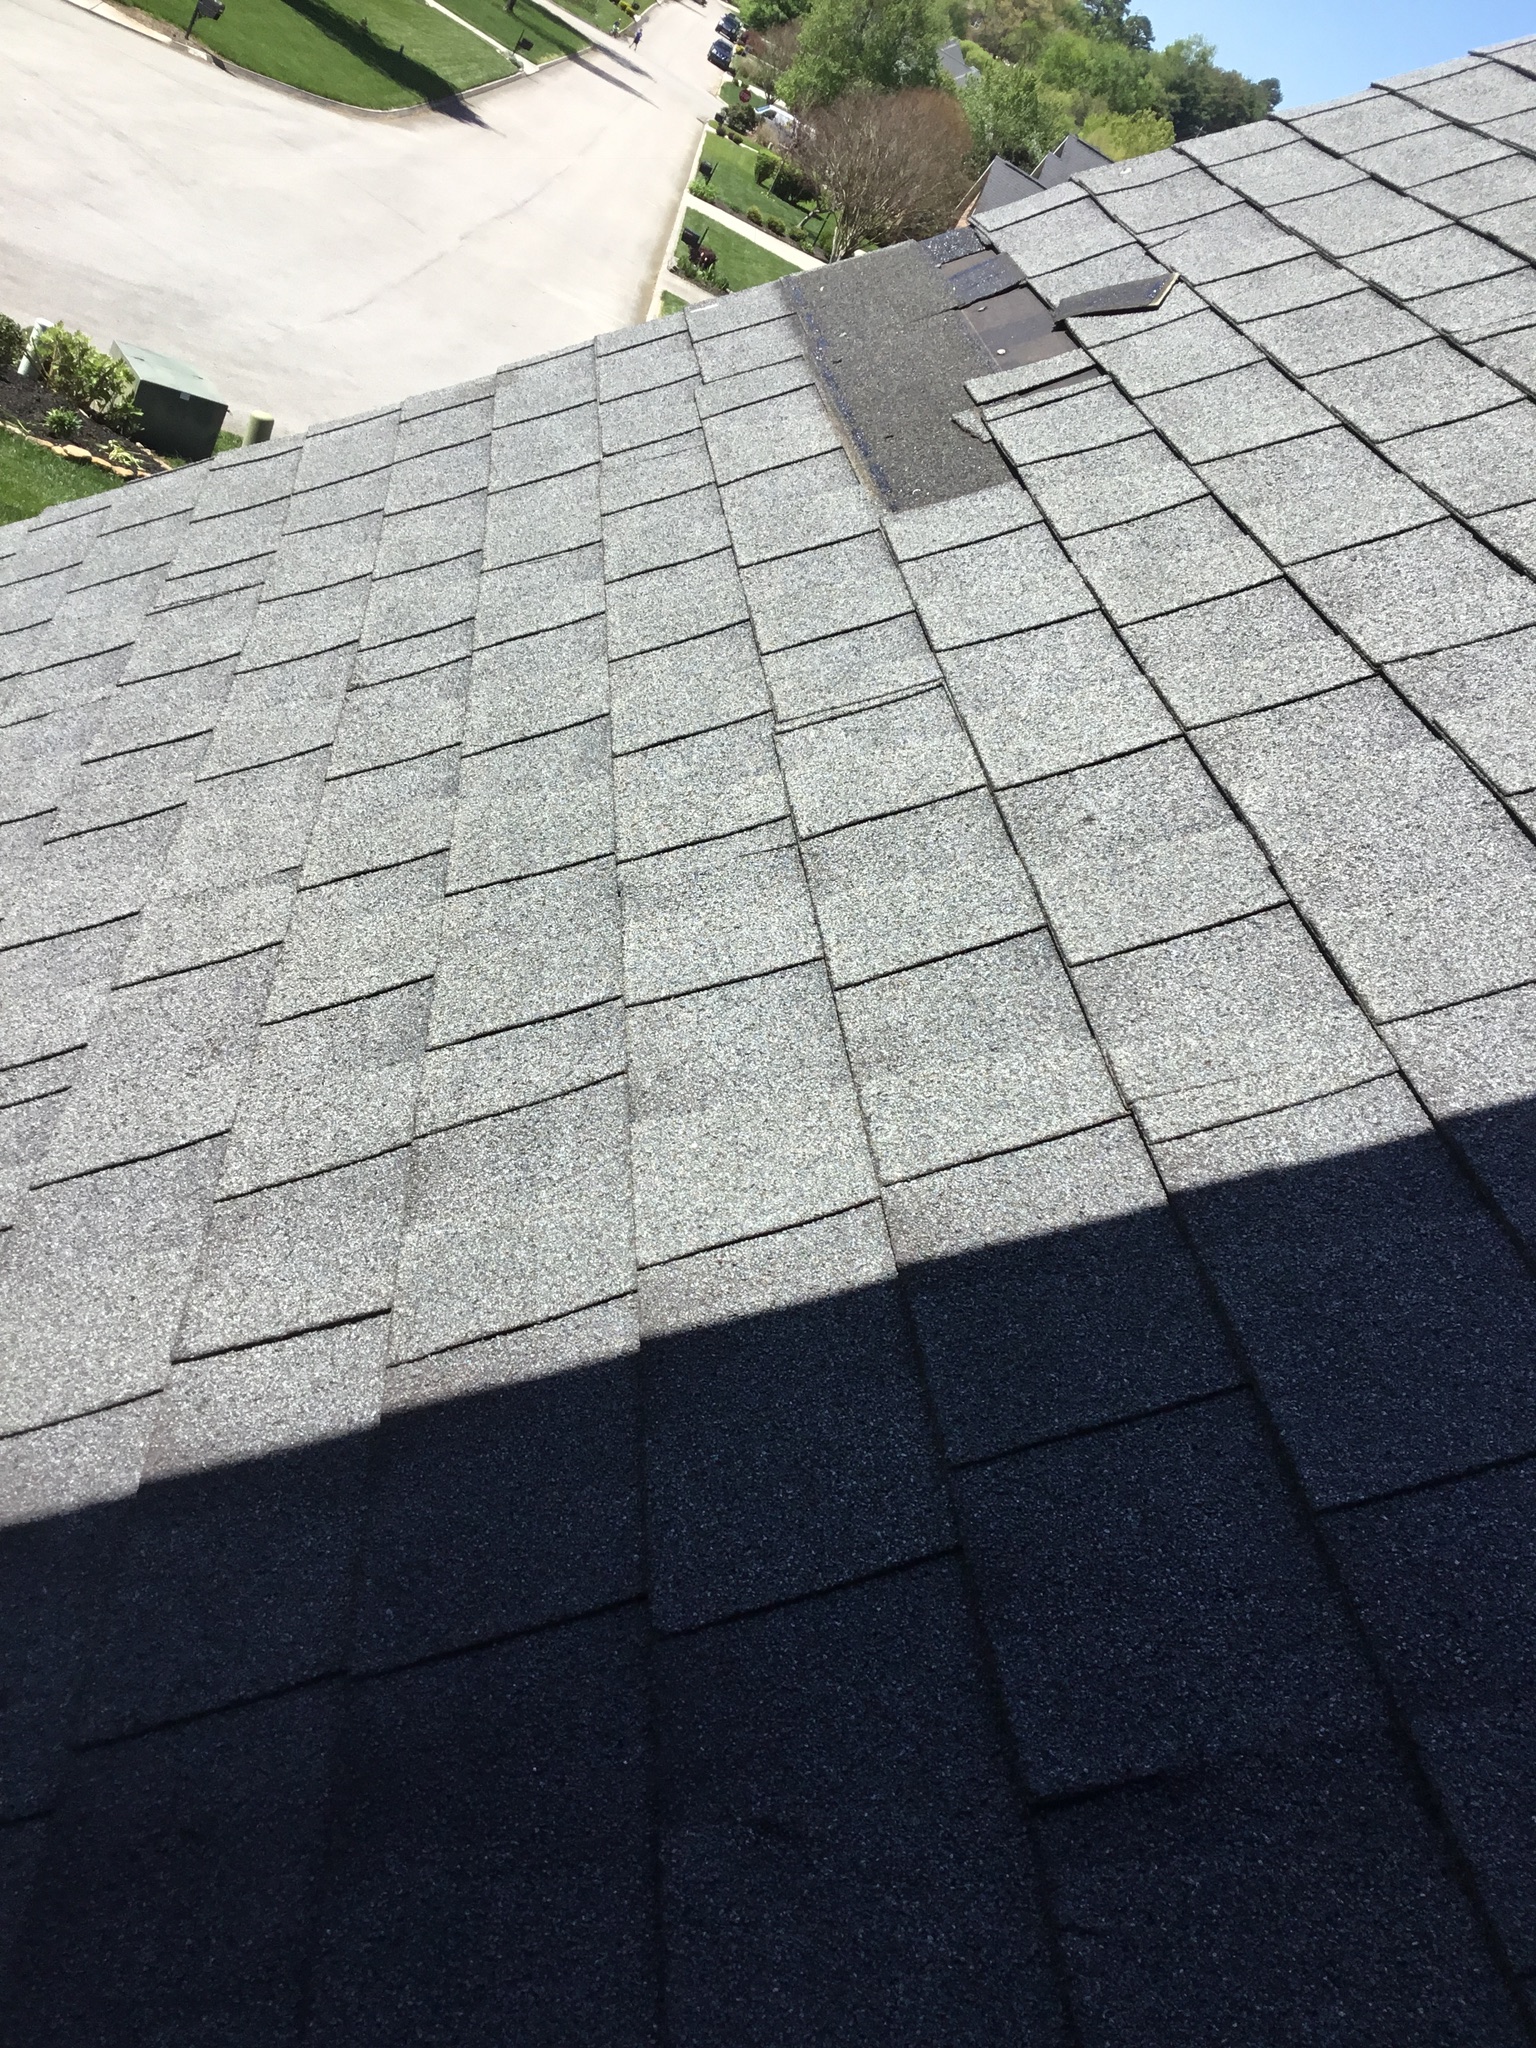 This is a view of the shingles on the roof with a section that has fallen off.